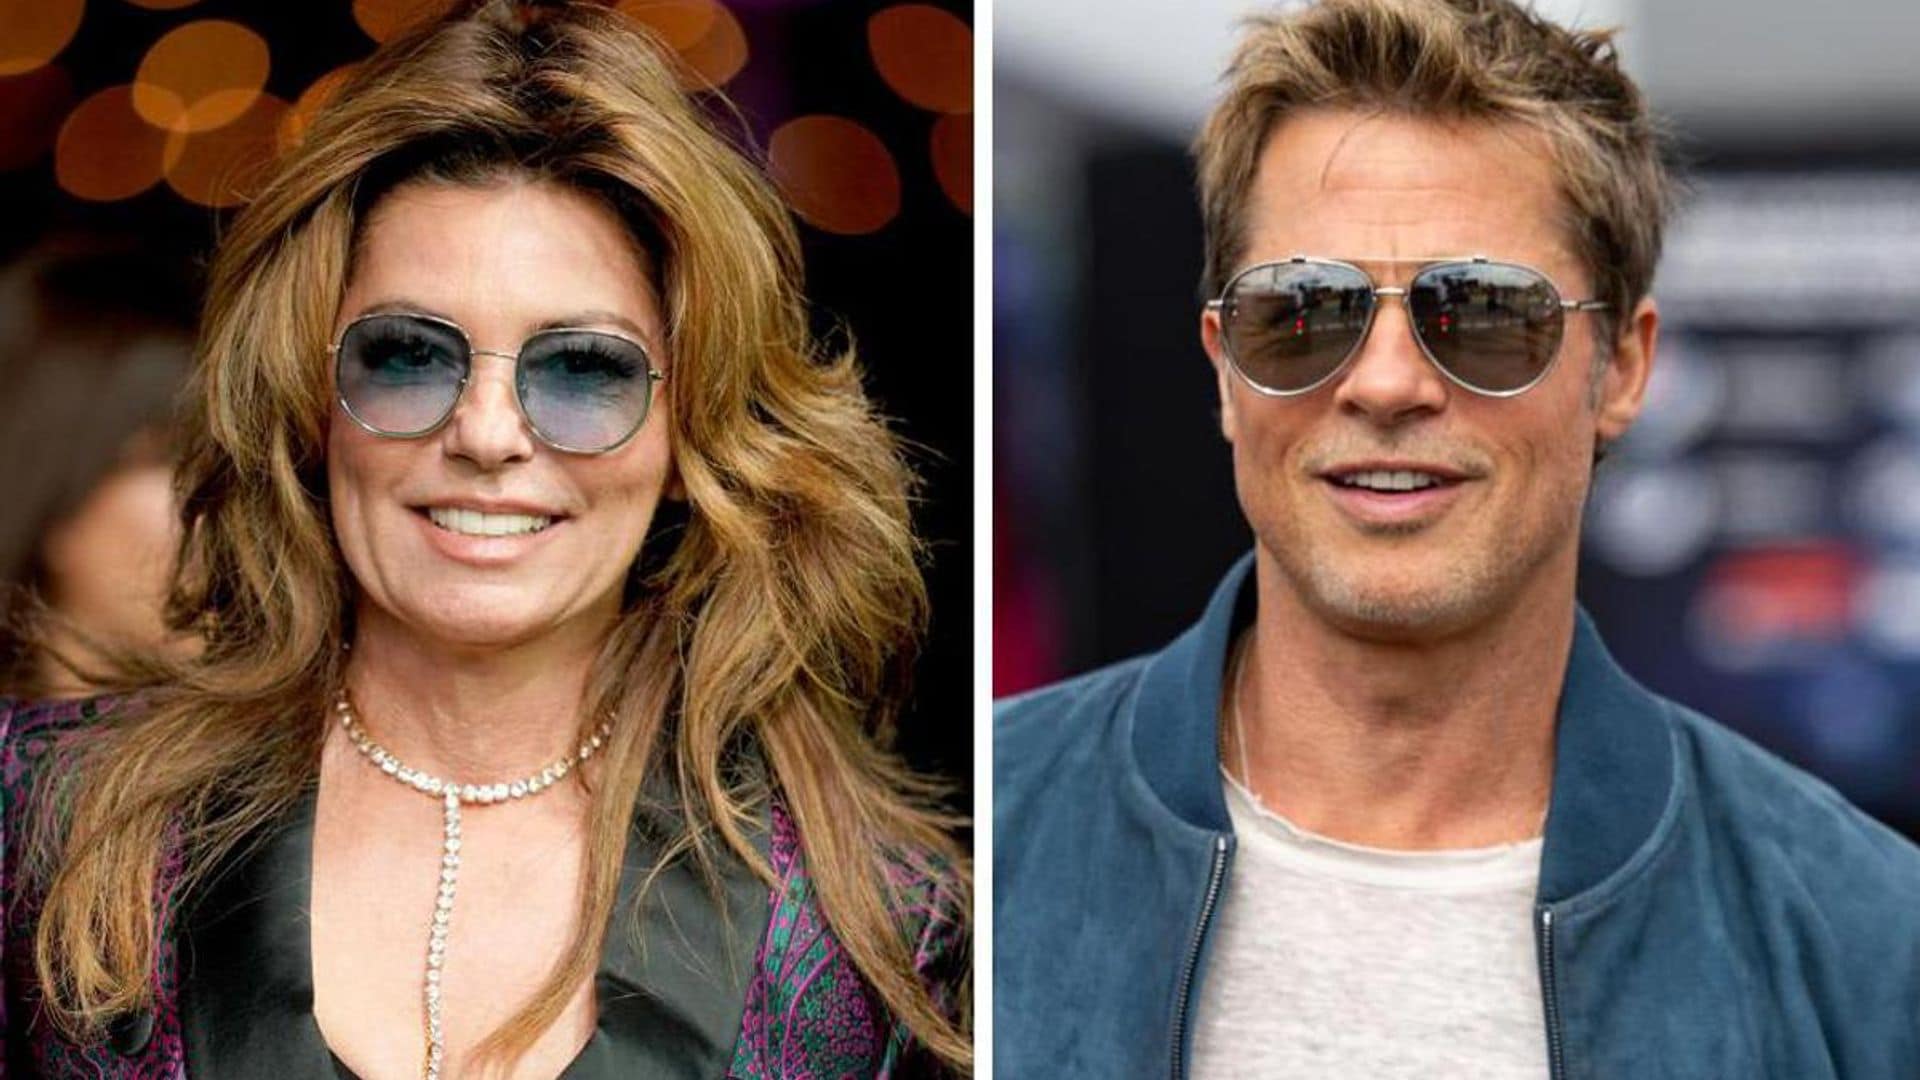 Shania Twain leaves hilarious comment for Brad Pitt’s 60th birthday